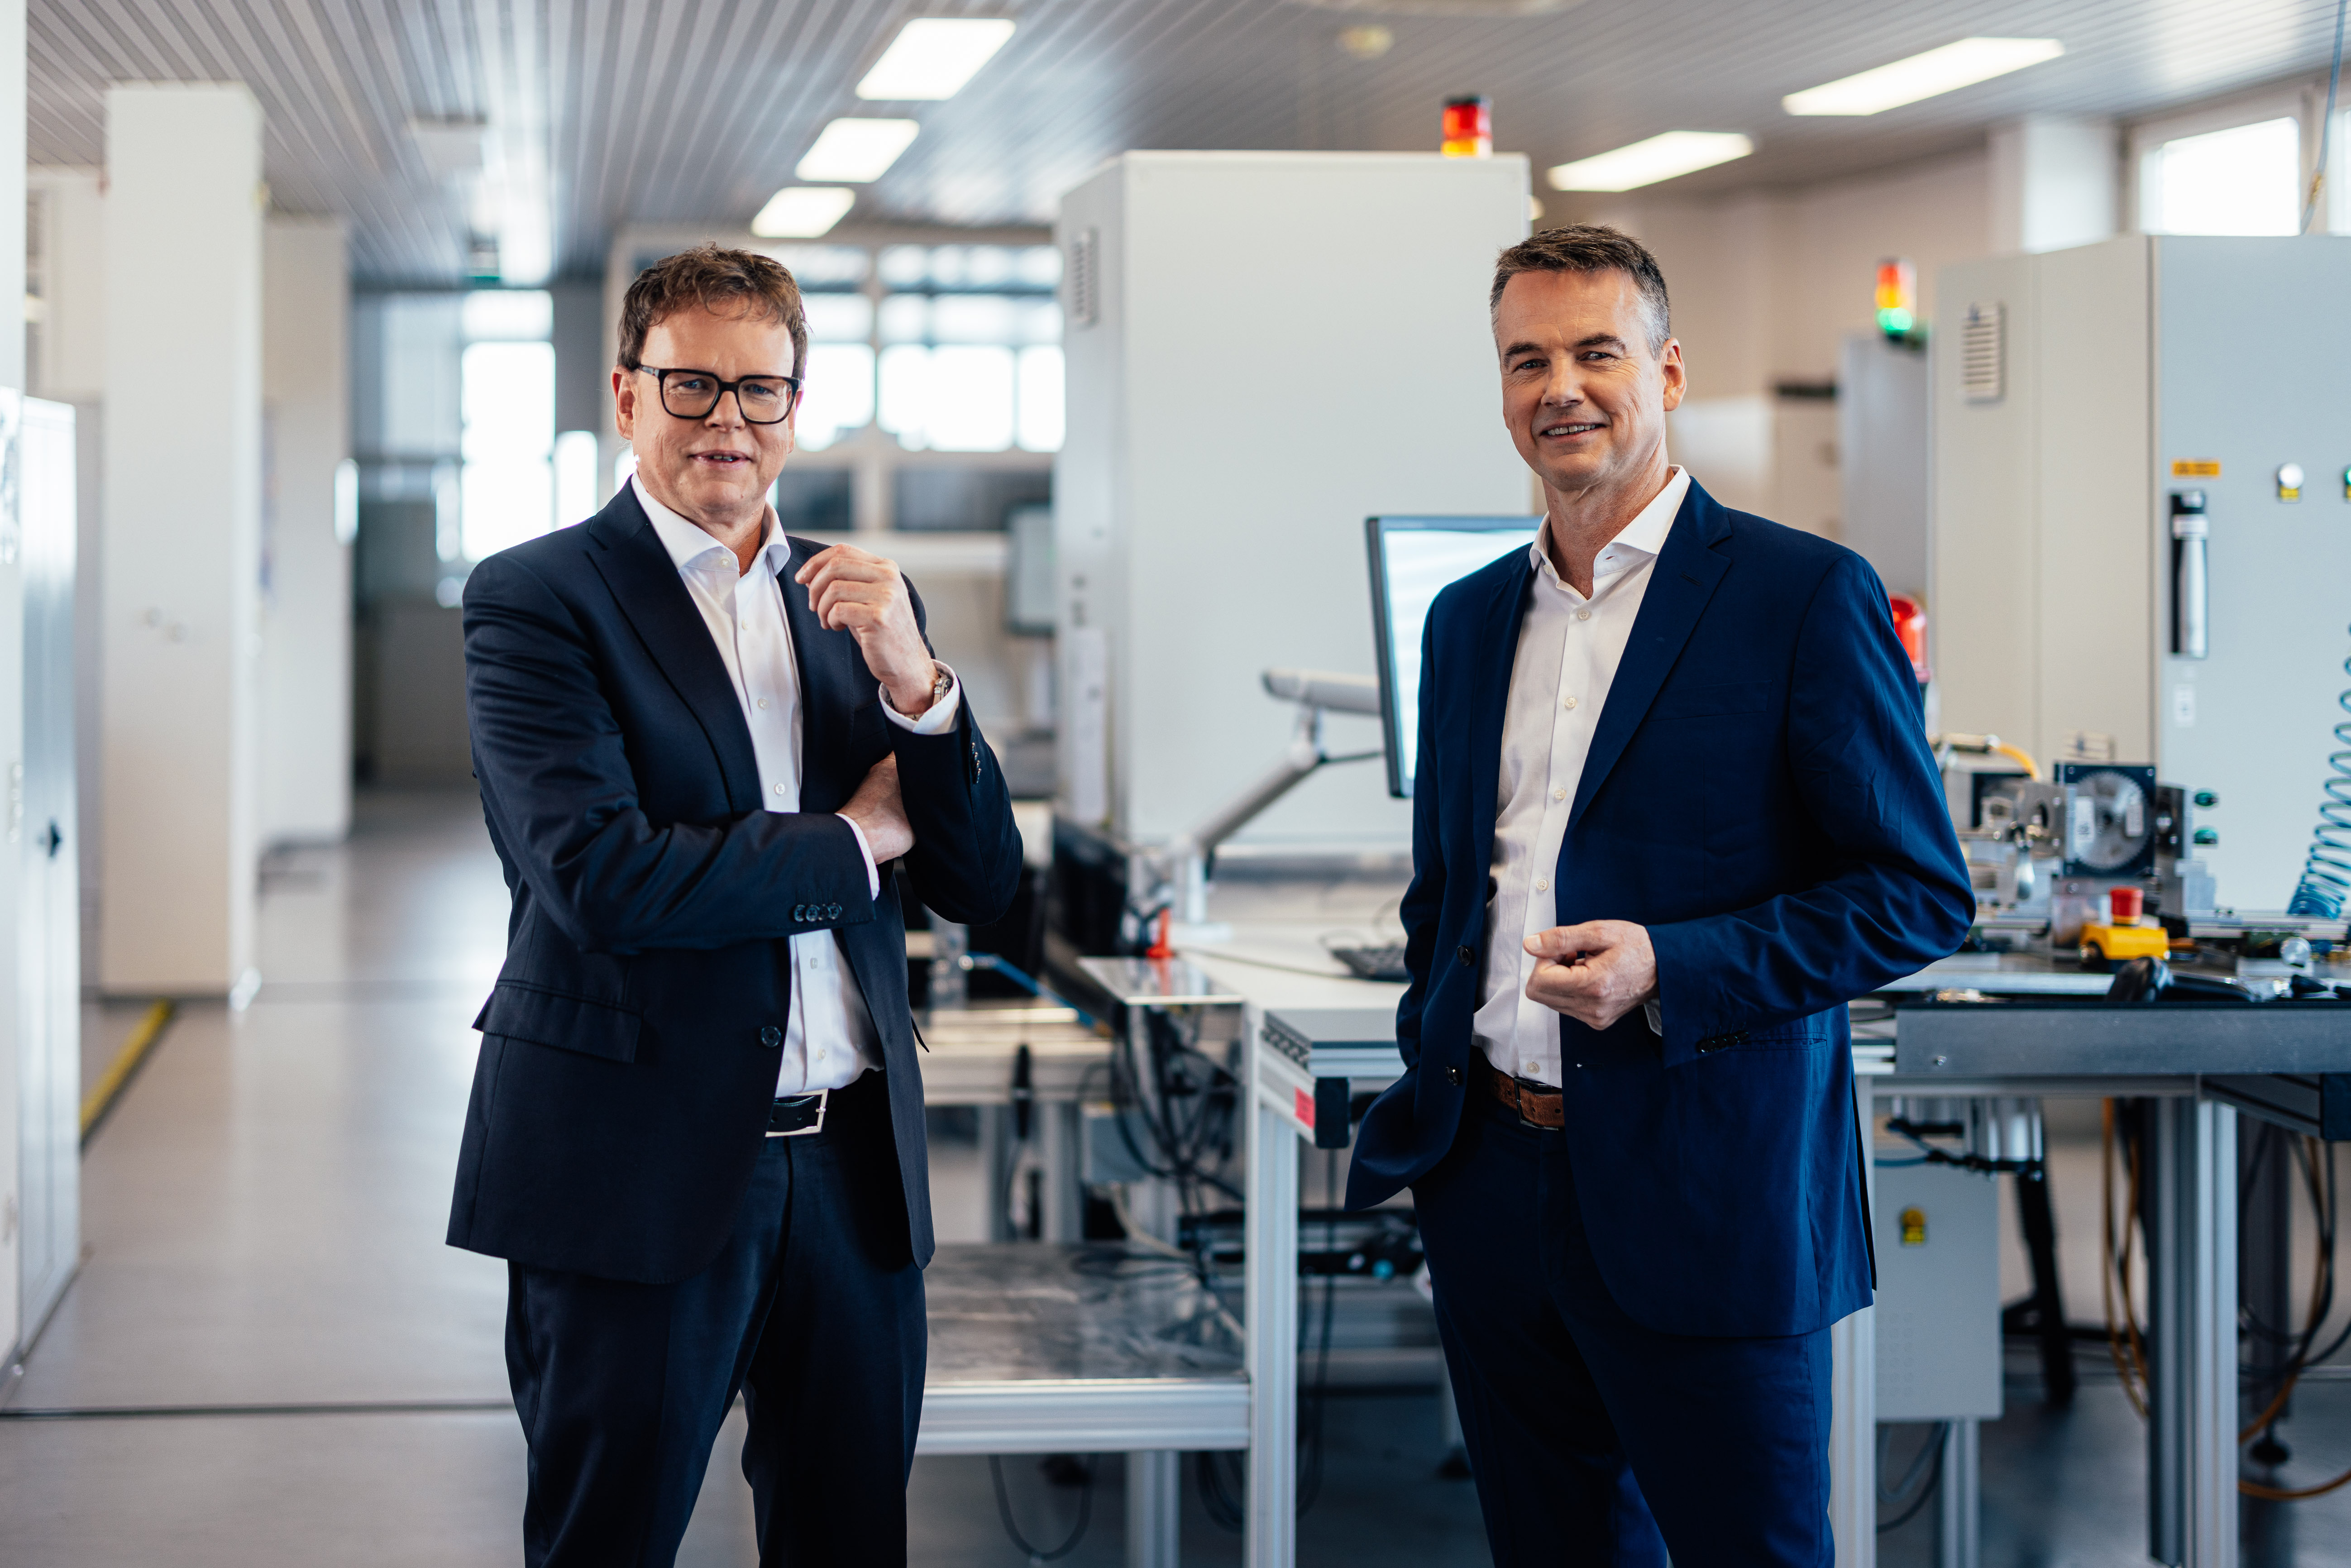 The image shows the sensor testing laboratory of Noris Group with the two managing directors Michael and Florian Schmidmer standing in front of a testing station